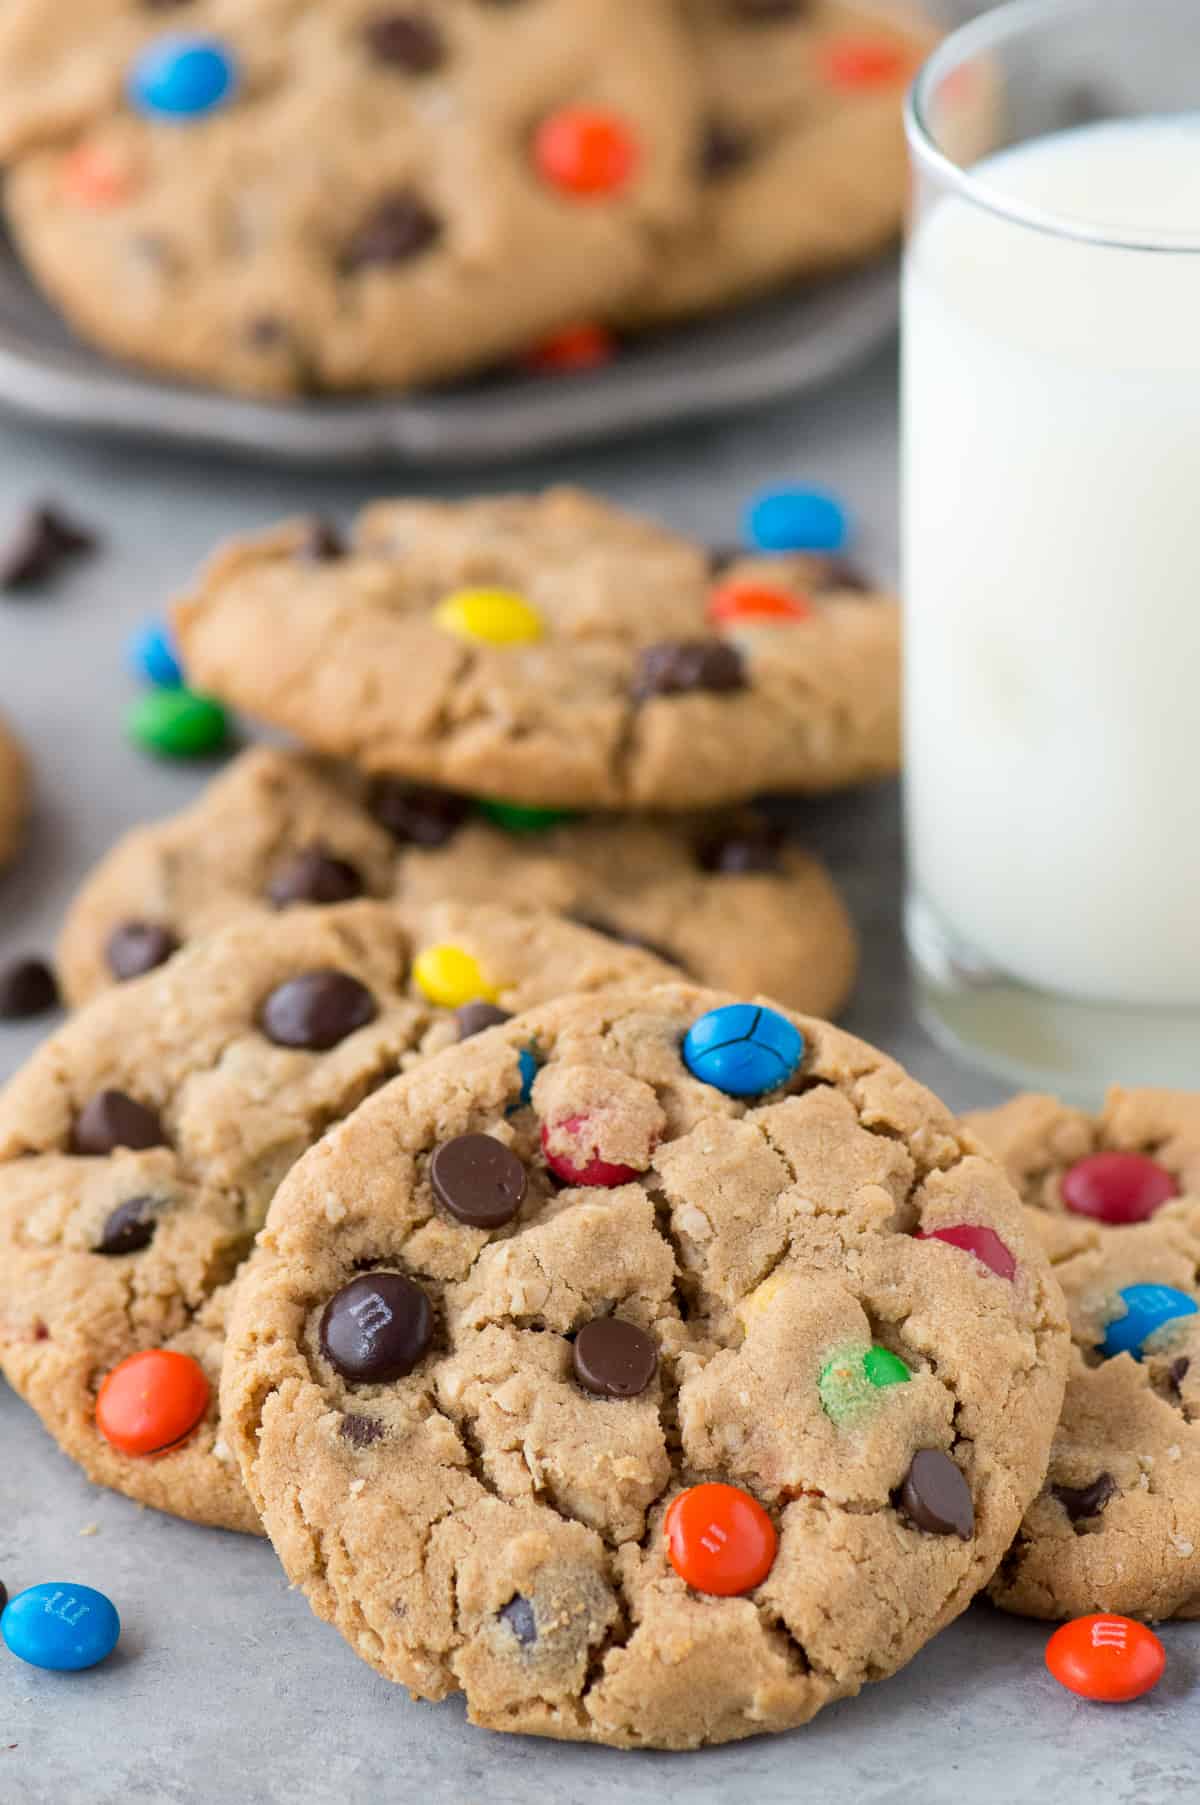 monster cookies with m&ms and chocolate chips with glass of milk in the background